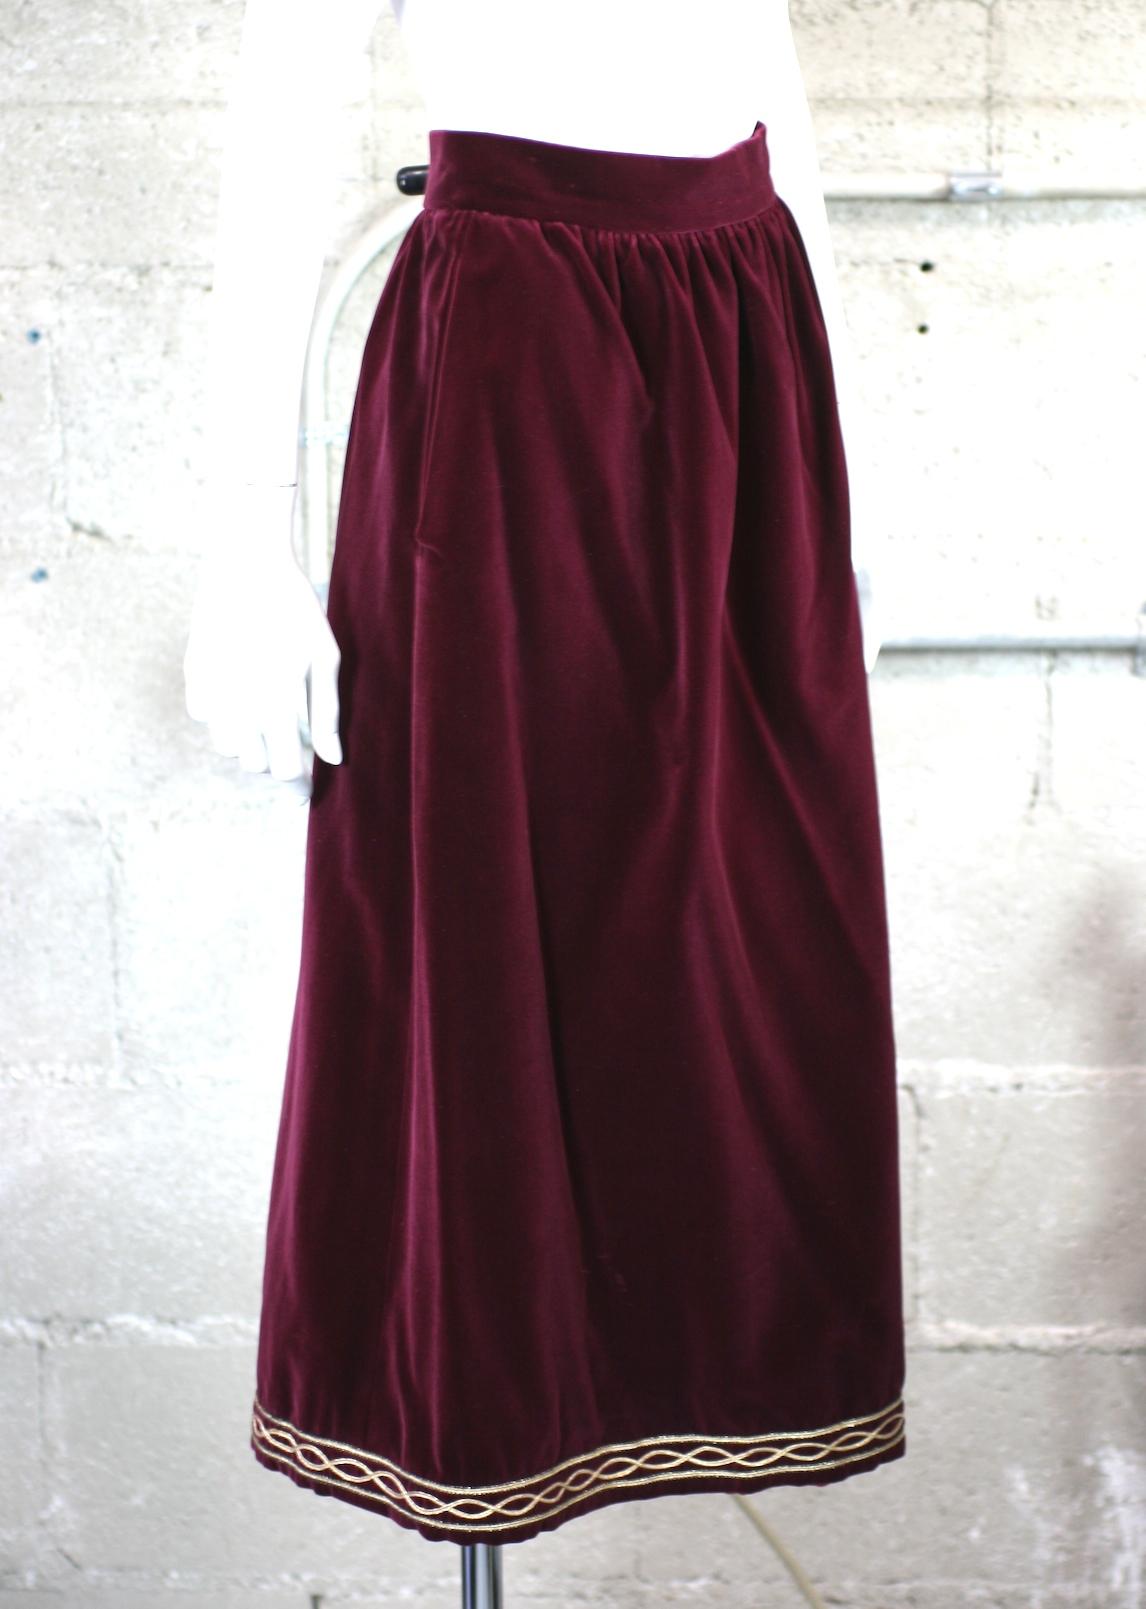 Yves Saint Laurent Russian Collection Skirt in a soft, silky wine cotton/rayon blend. Simply constructed with gathered waist and gold soutache embroidery along hem. Fully lined.
YSL Rive Gauche. Side zip closure with 2 pockets.
Waist 28